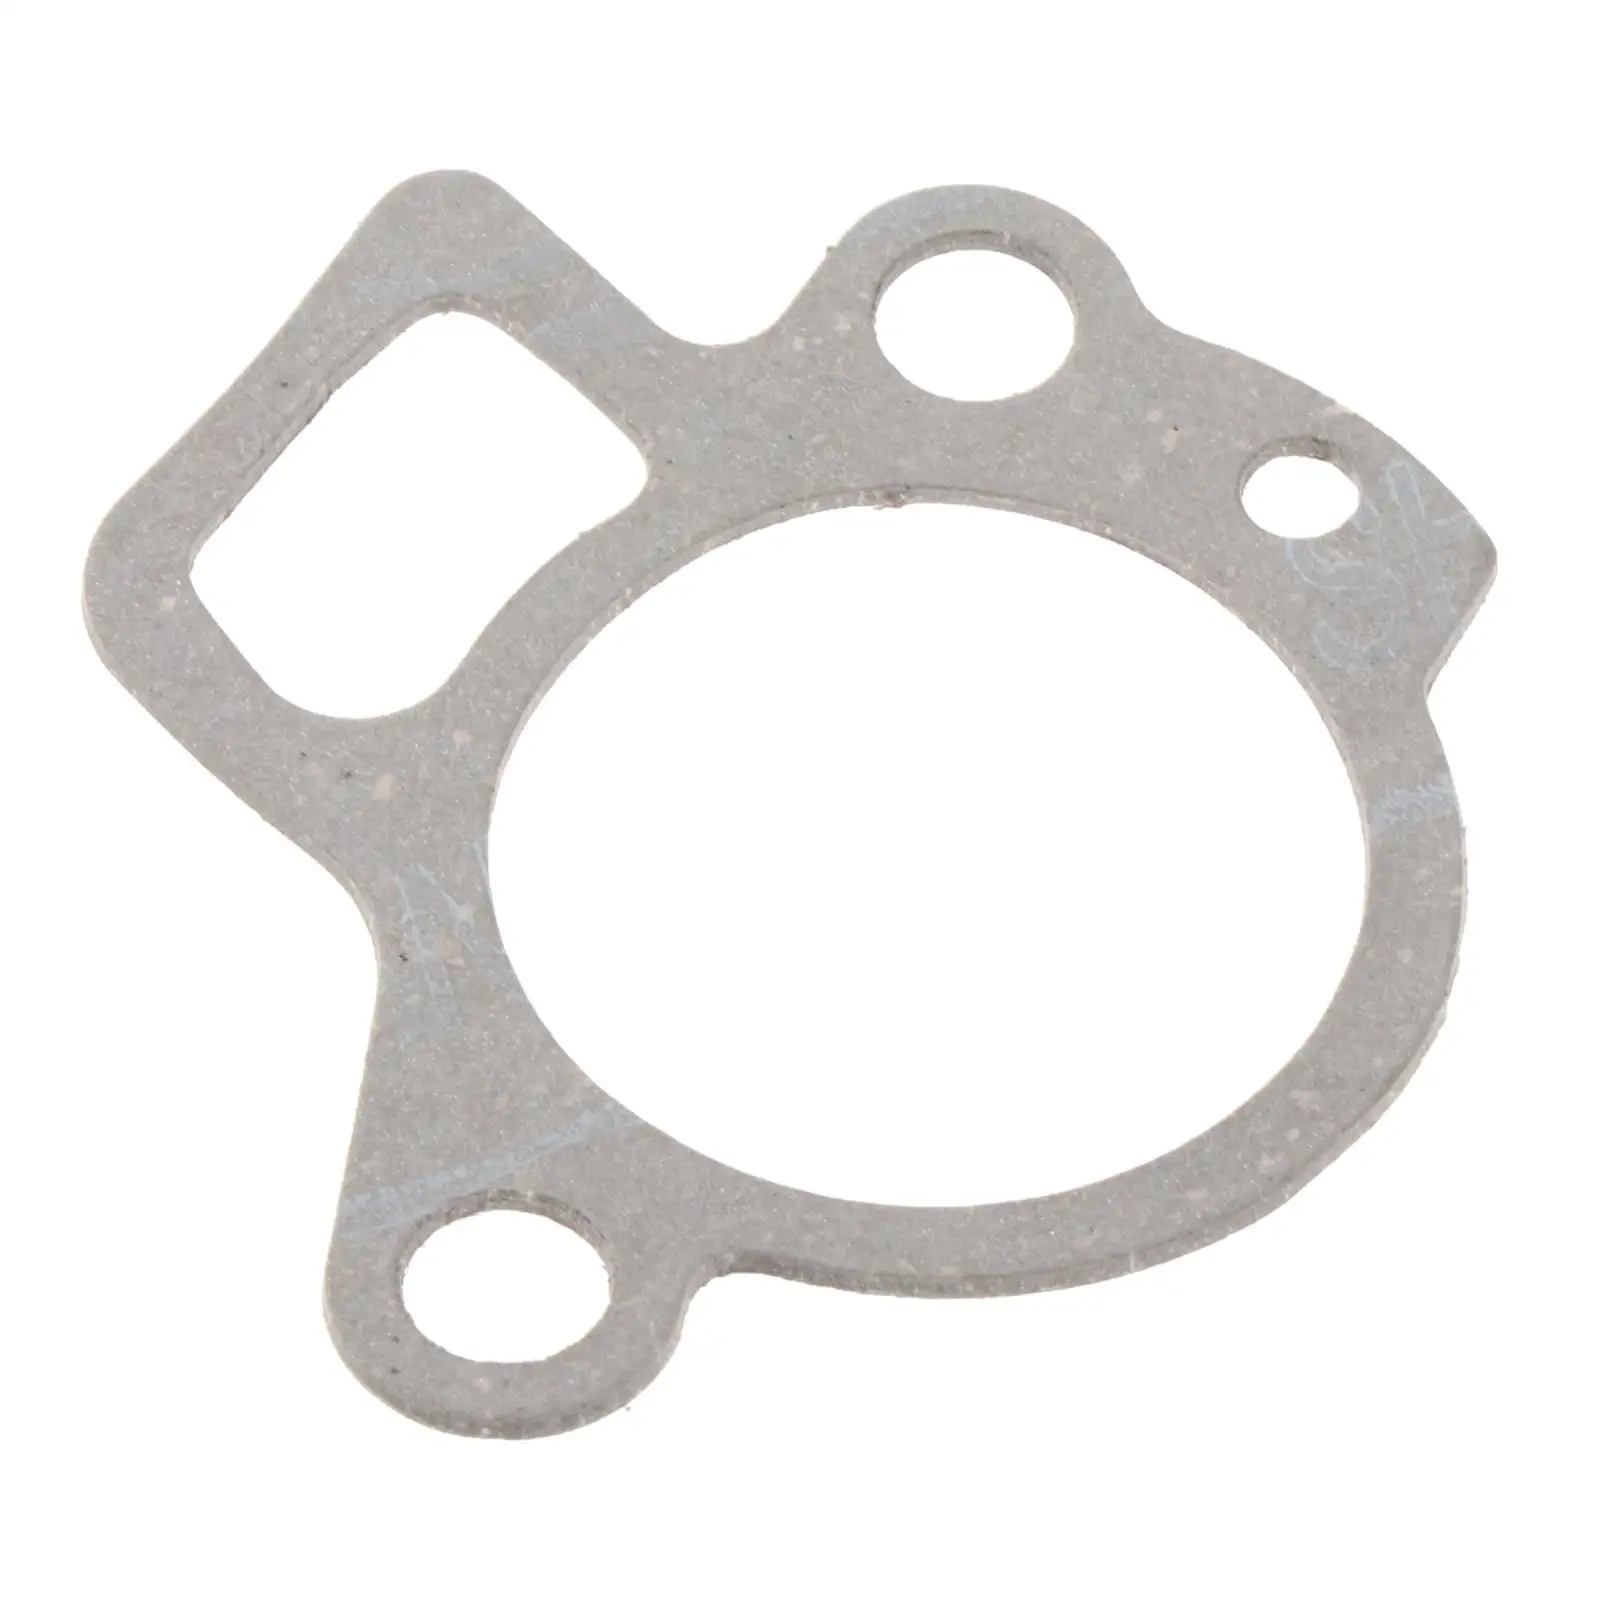 Thermostat Gasket 541-25 27-824853 6H3-12414-A1 Fit for Yamaha Outboard Engine 9.9-70 HP Replaces Accessories High Performance